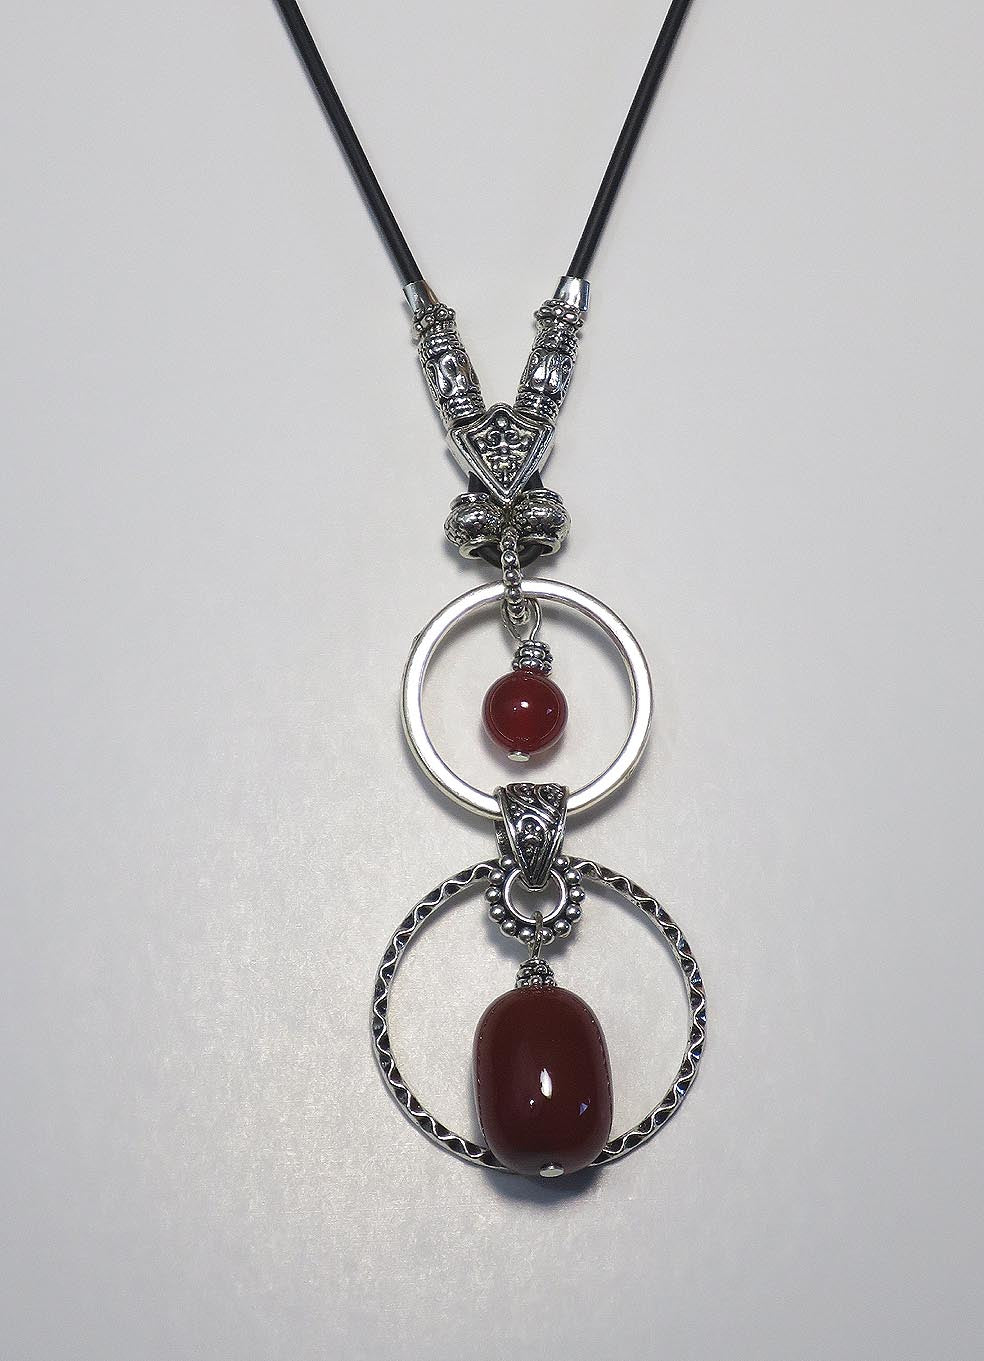 DOUBLE RING with LARGE SEMI-PRECIOUS STONE ADJUSTABLE NECKLACE